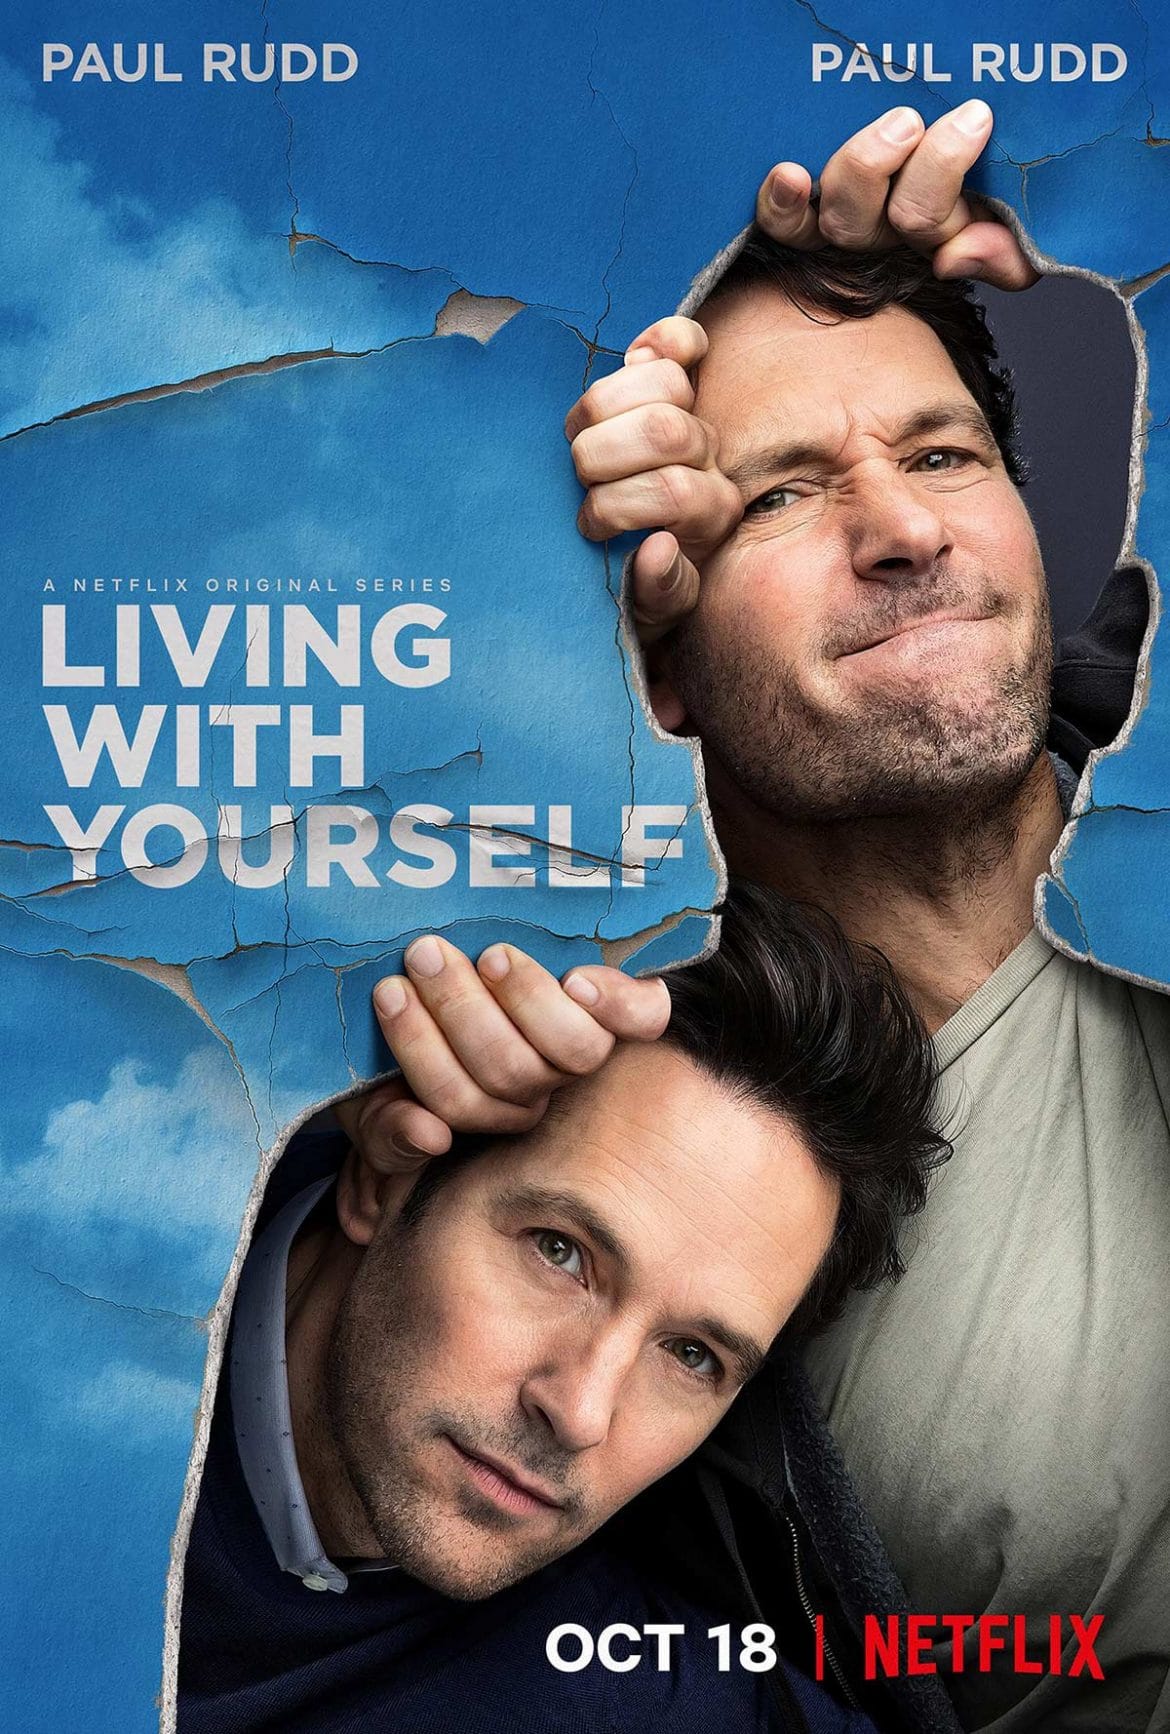 Netflix Movie Posters, Living With Yourself Netflix Trailer, Netflix Paul Rudd Living With Yourself Trailer, Netflix Comedy Movies, Coming to Netflix in 2019